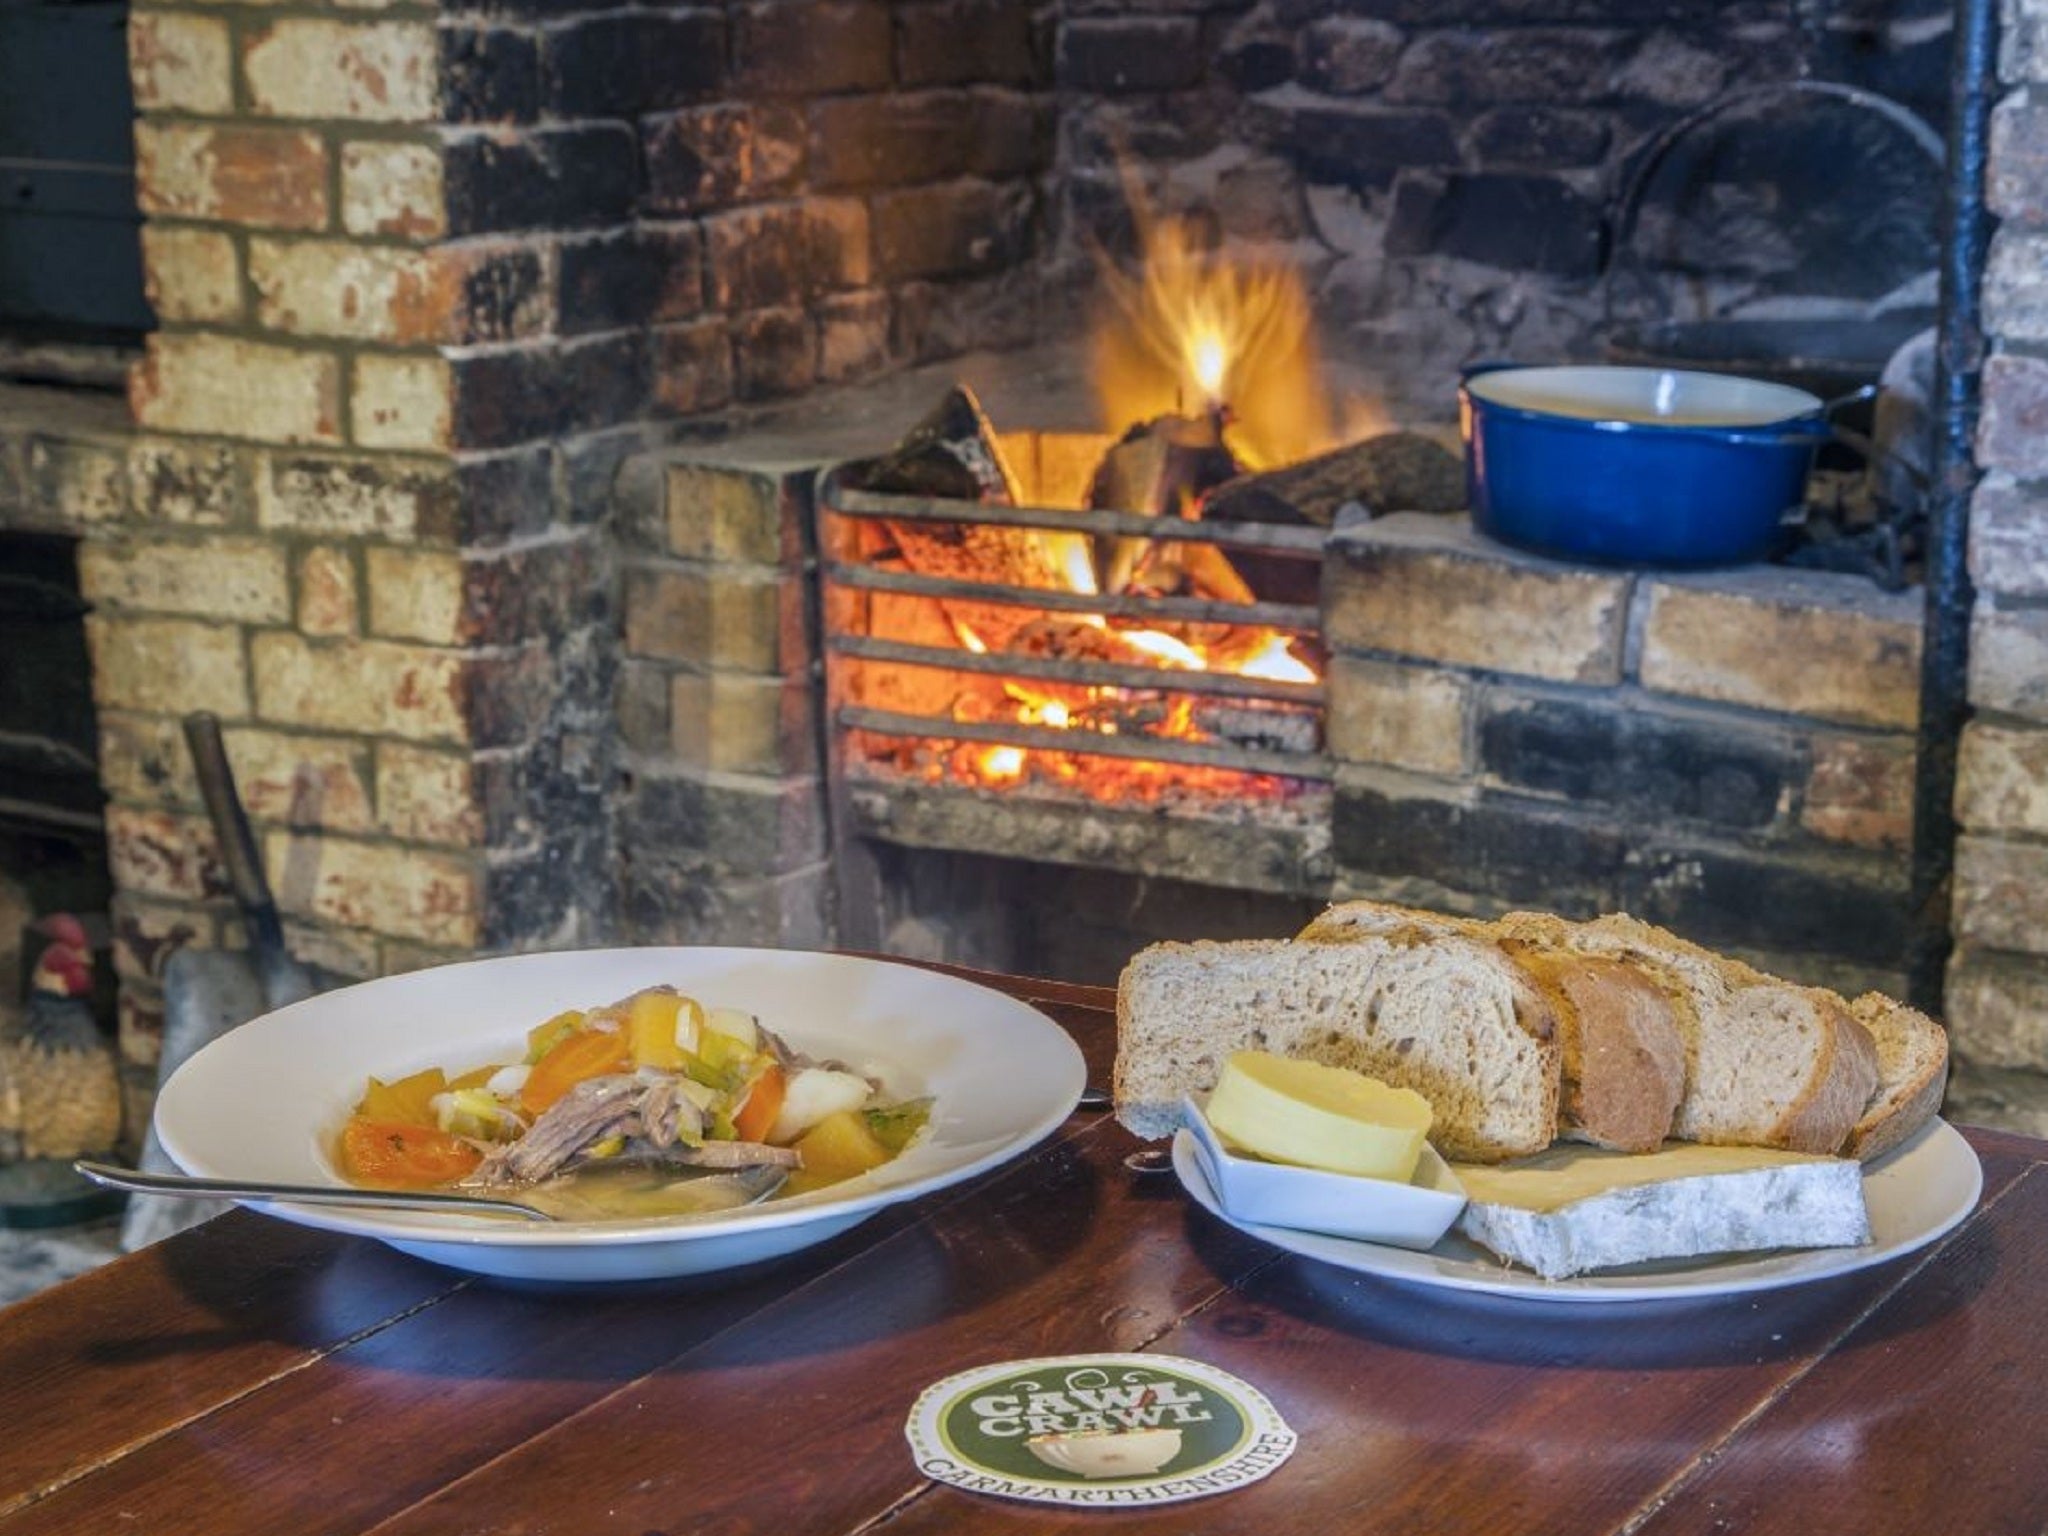 A warming bowl of cawl goes well with servings of bread in front of a fire